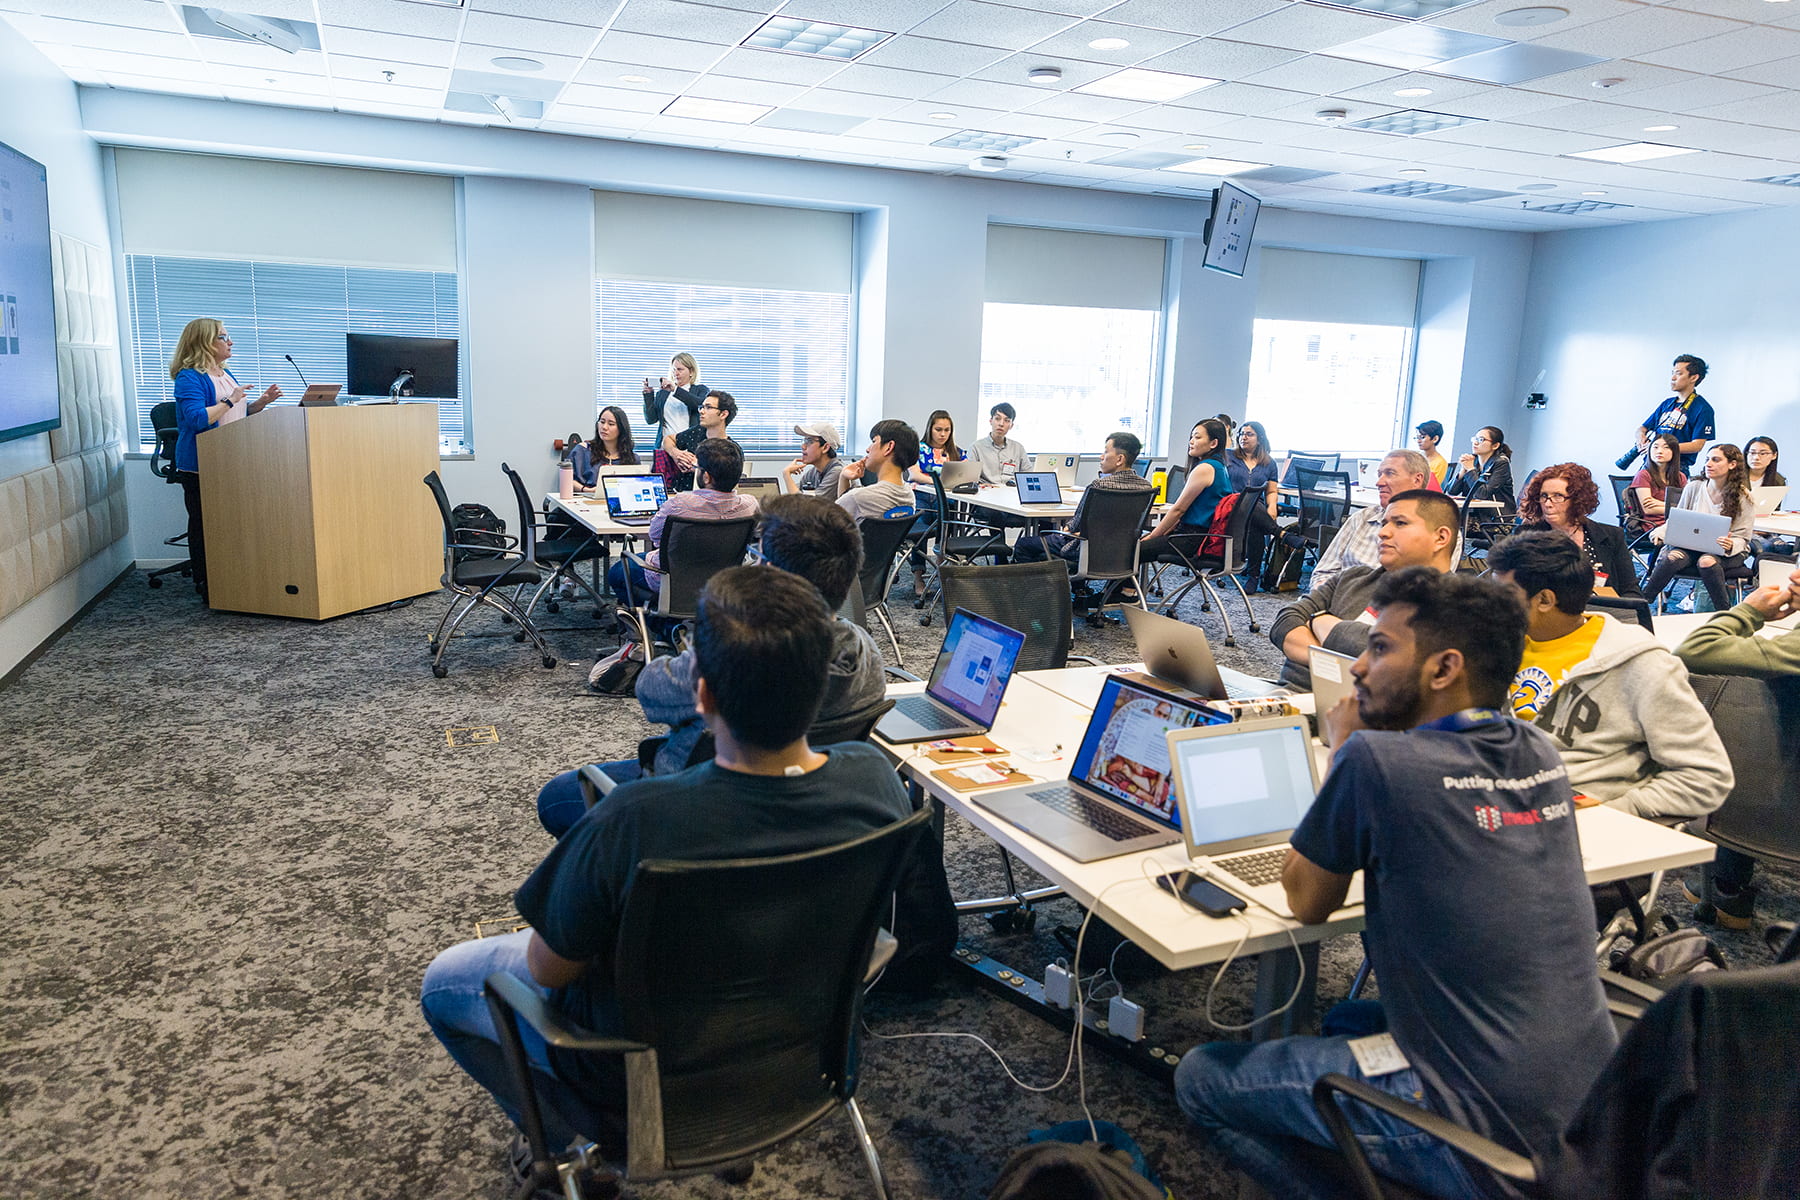 Donna Caldwell, a senior solutions consultant, leads the Adobe XD bootcamp for students who competed in the Adobe Creative Jam April 18, 2019. Photo by Robert C. Bain